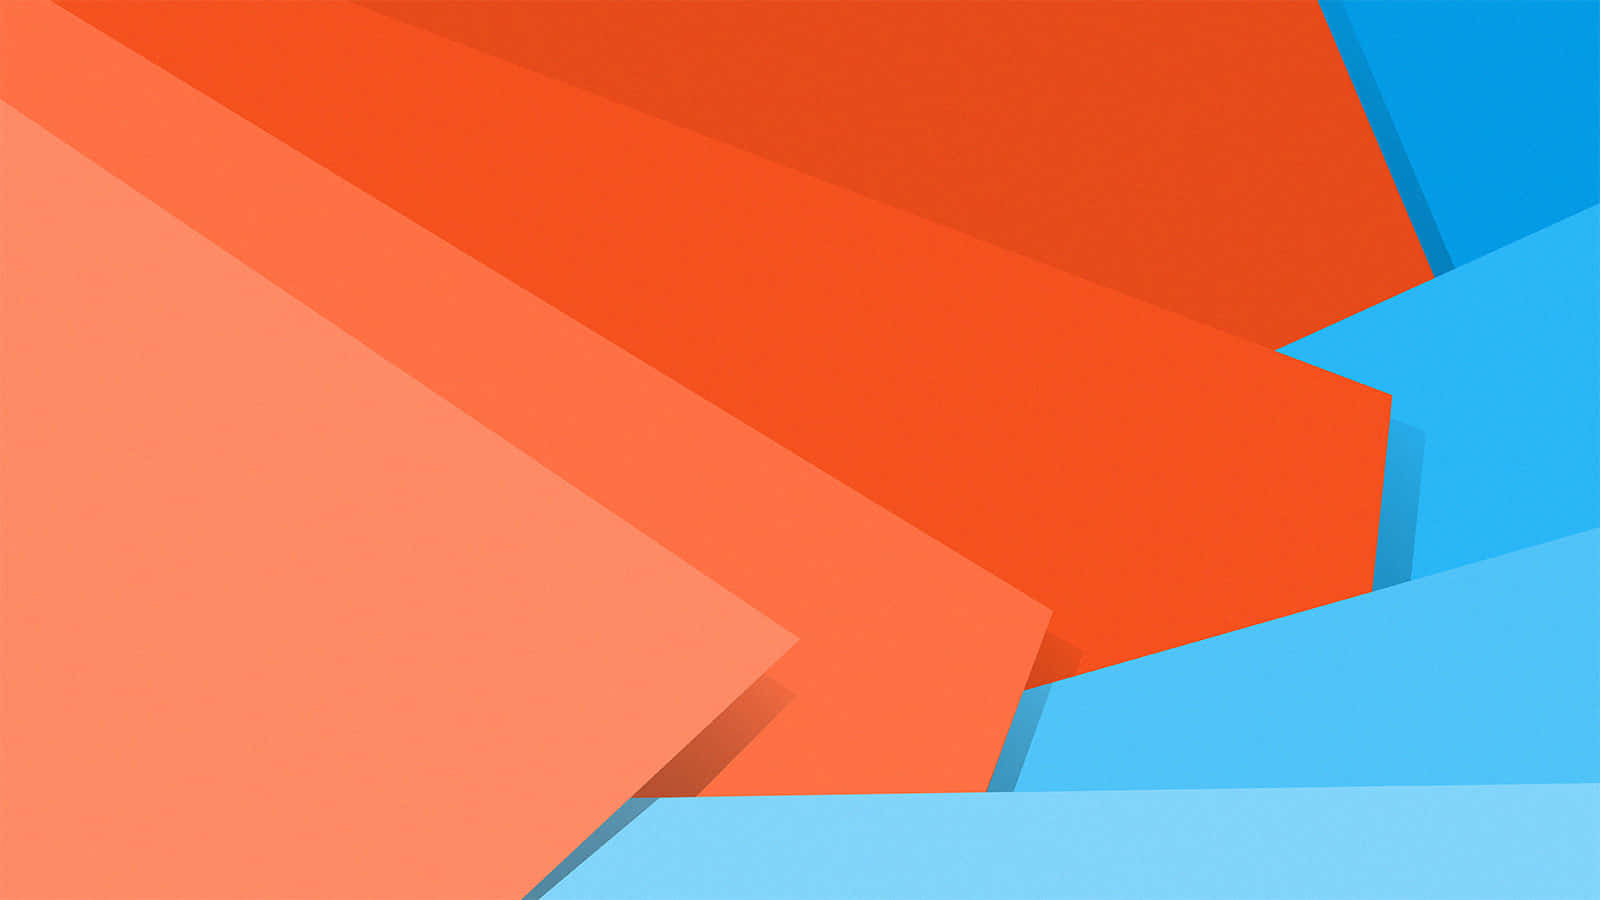 Colorful and Contemporary Material Design